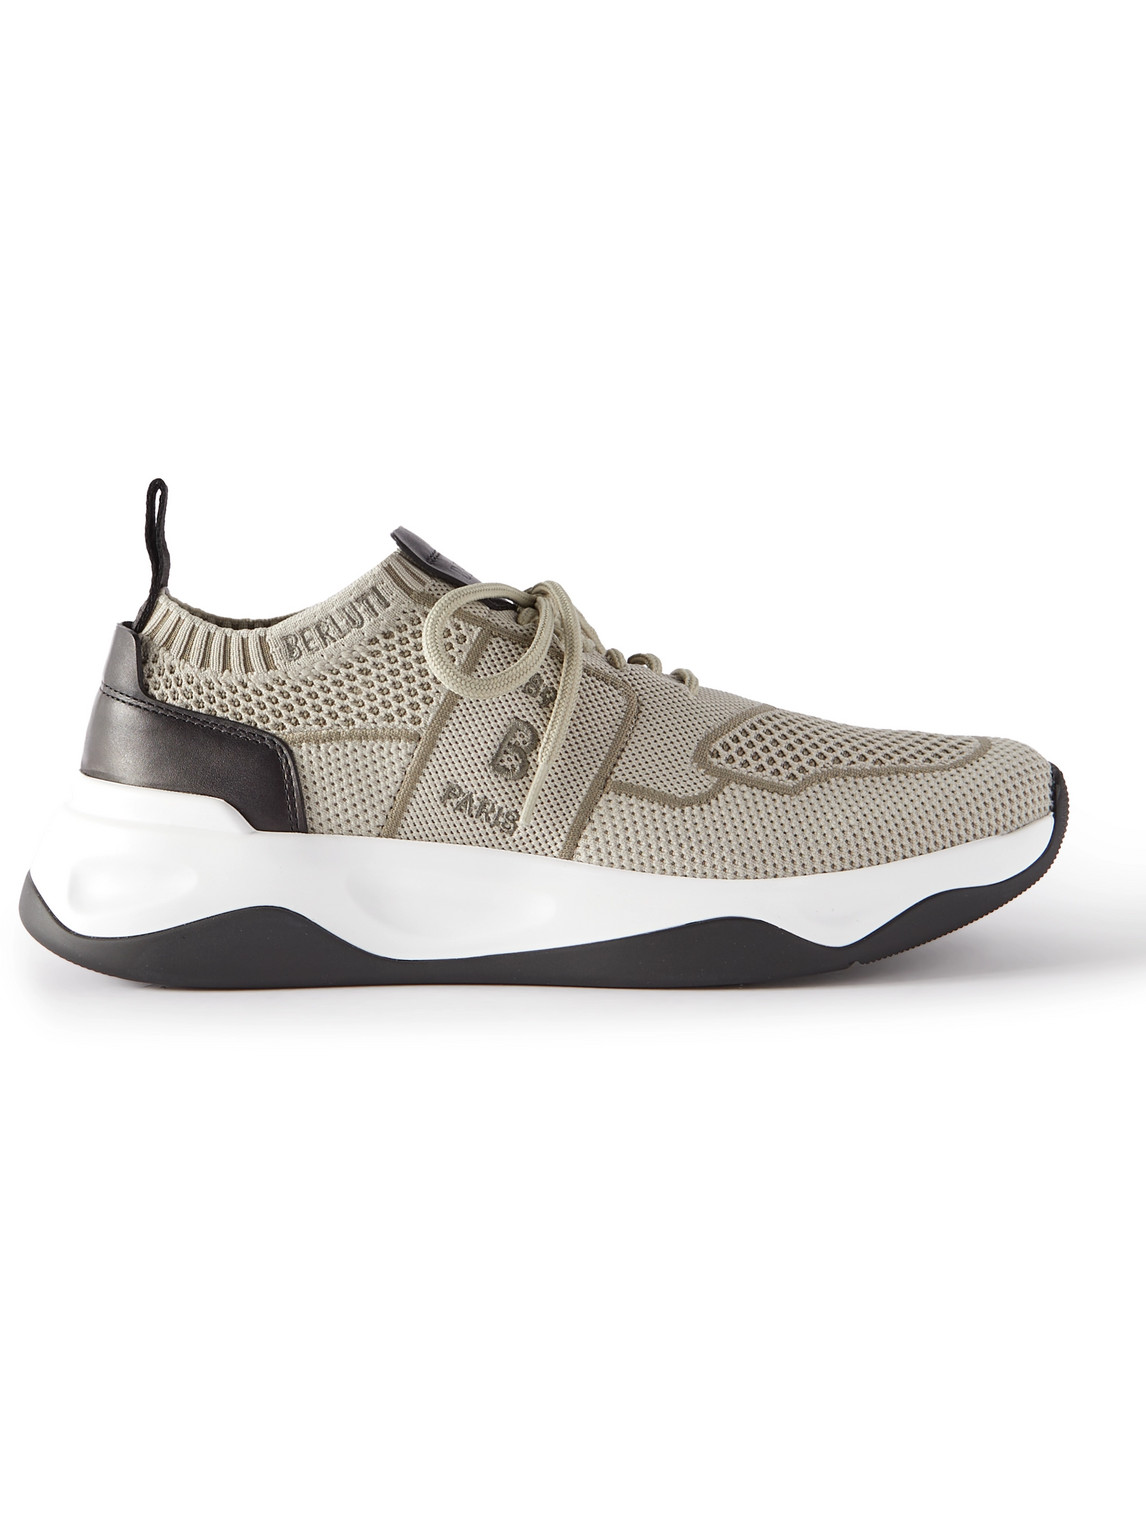 BERLUTI SHADOW LEATHER-TRIMMED MESH SNEAKERS